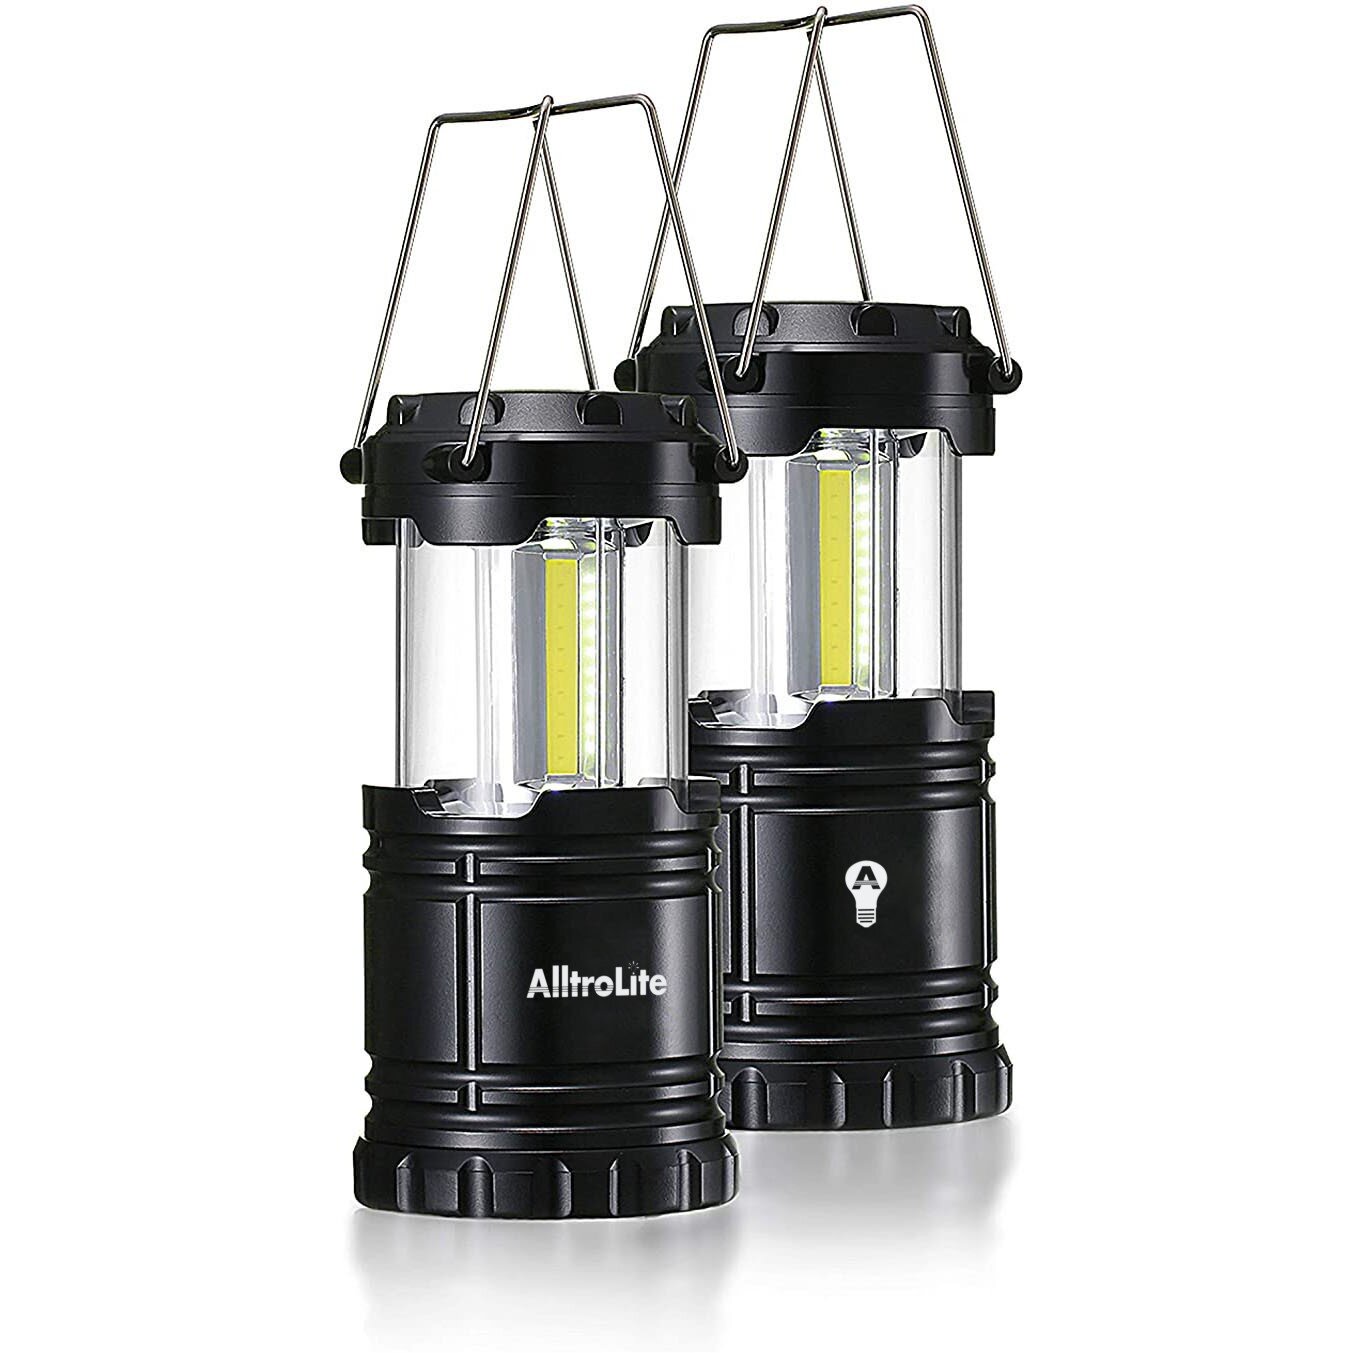 USA USB LED lantern rechargeable Light Camping Emergency Outdoor Hiking Lamps 